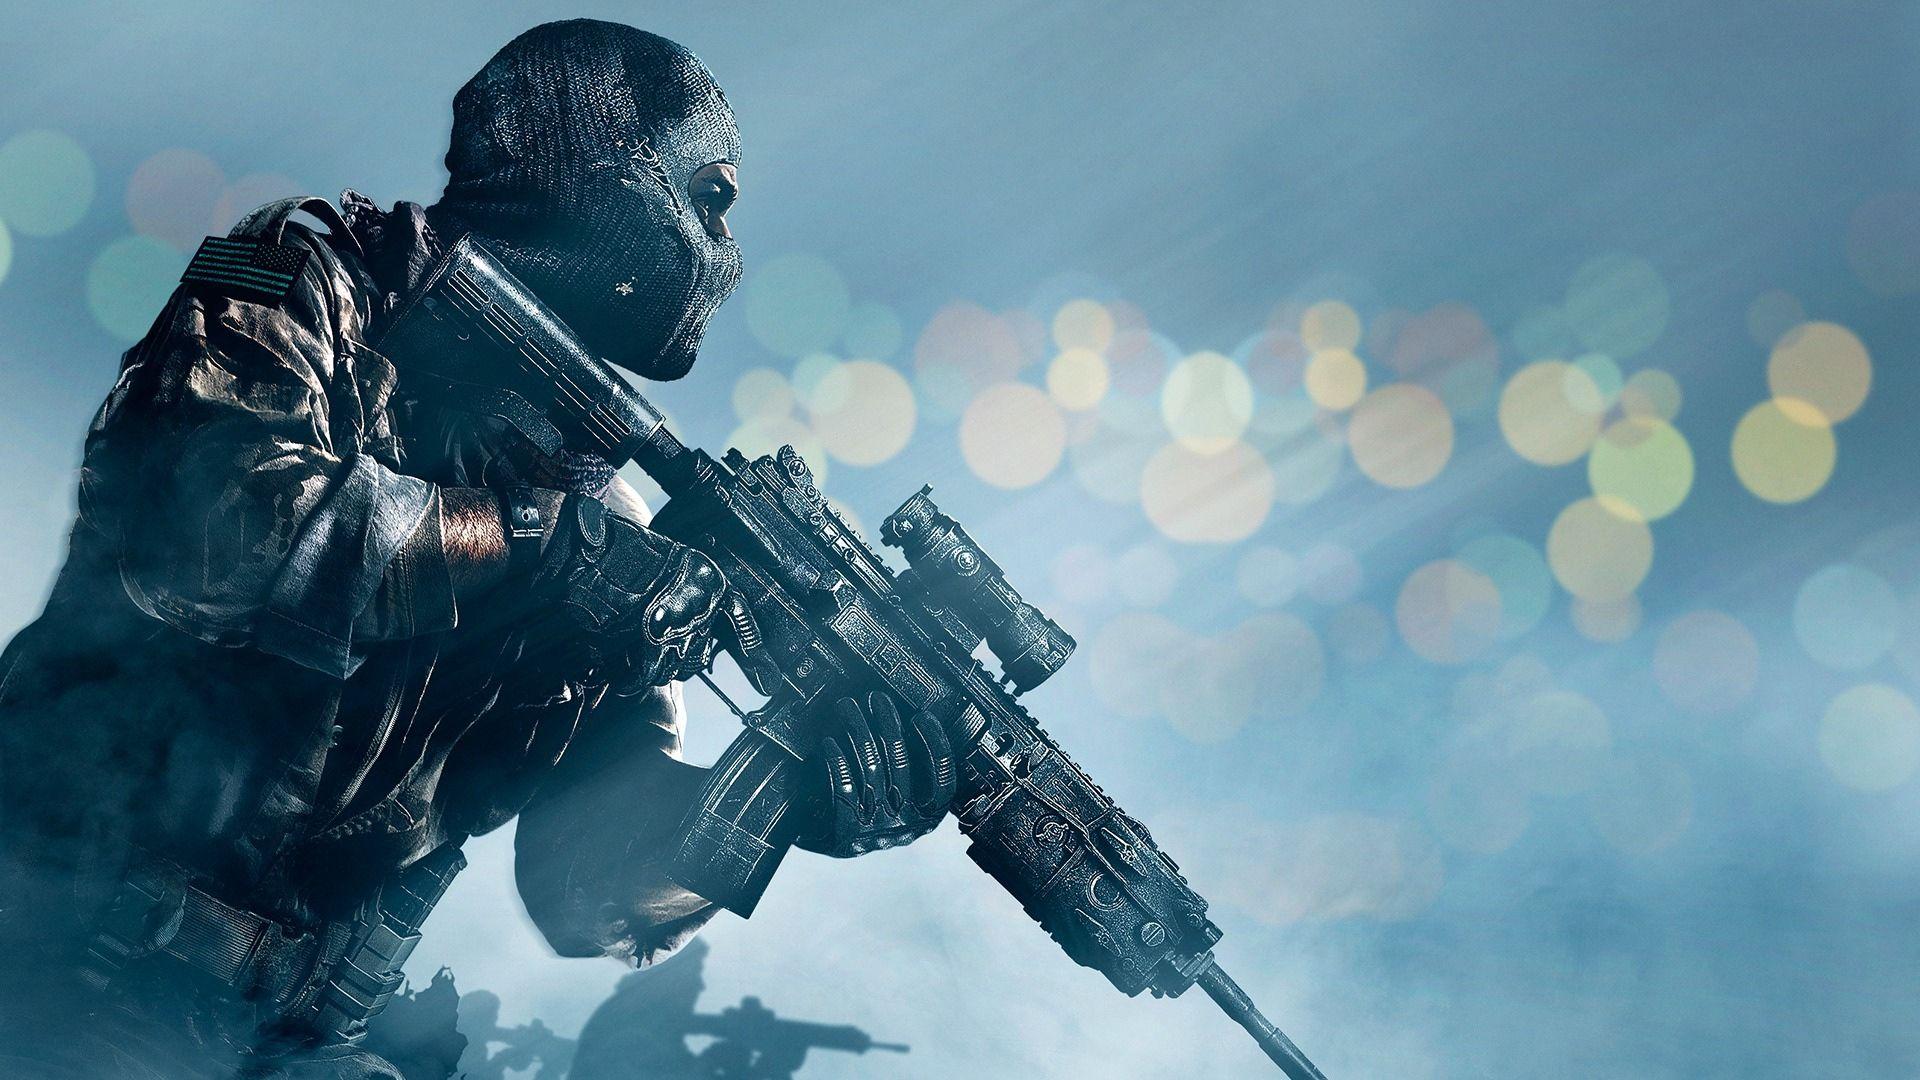 Download wallpaper 1920x1080 call of duty ghosts, activision